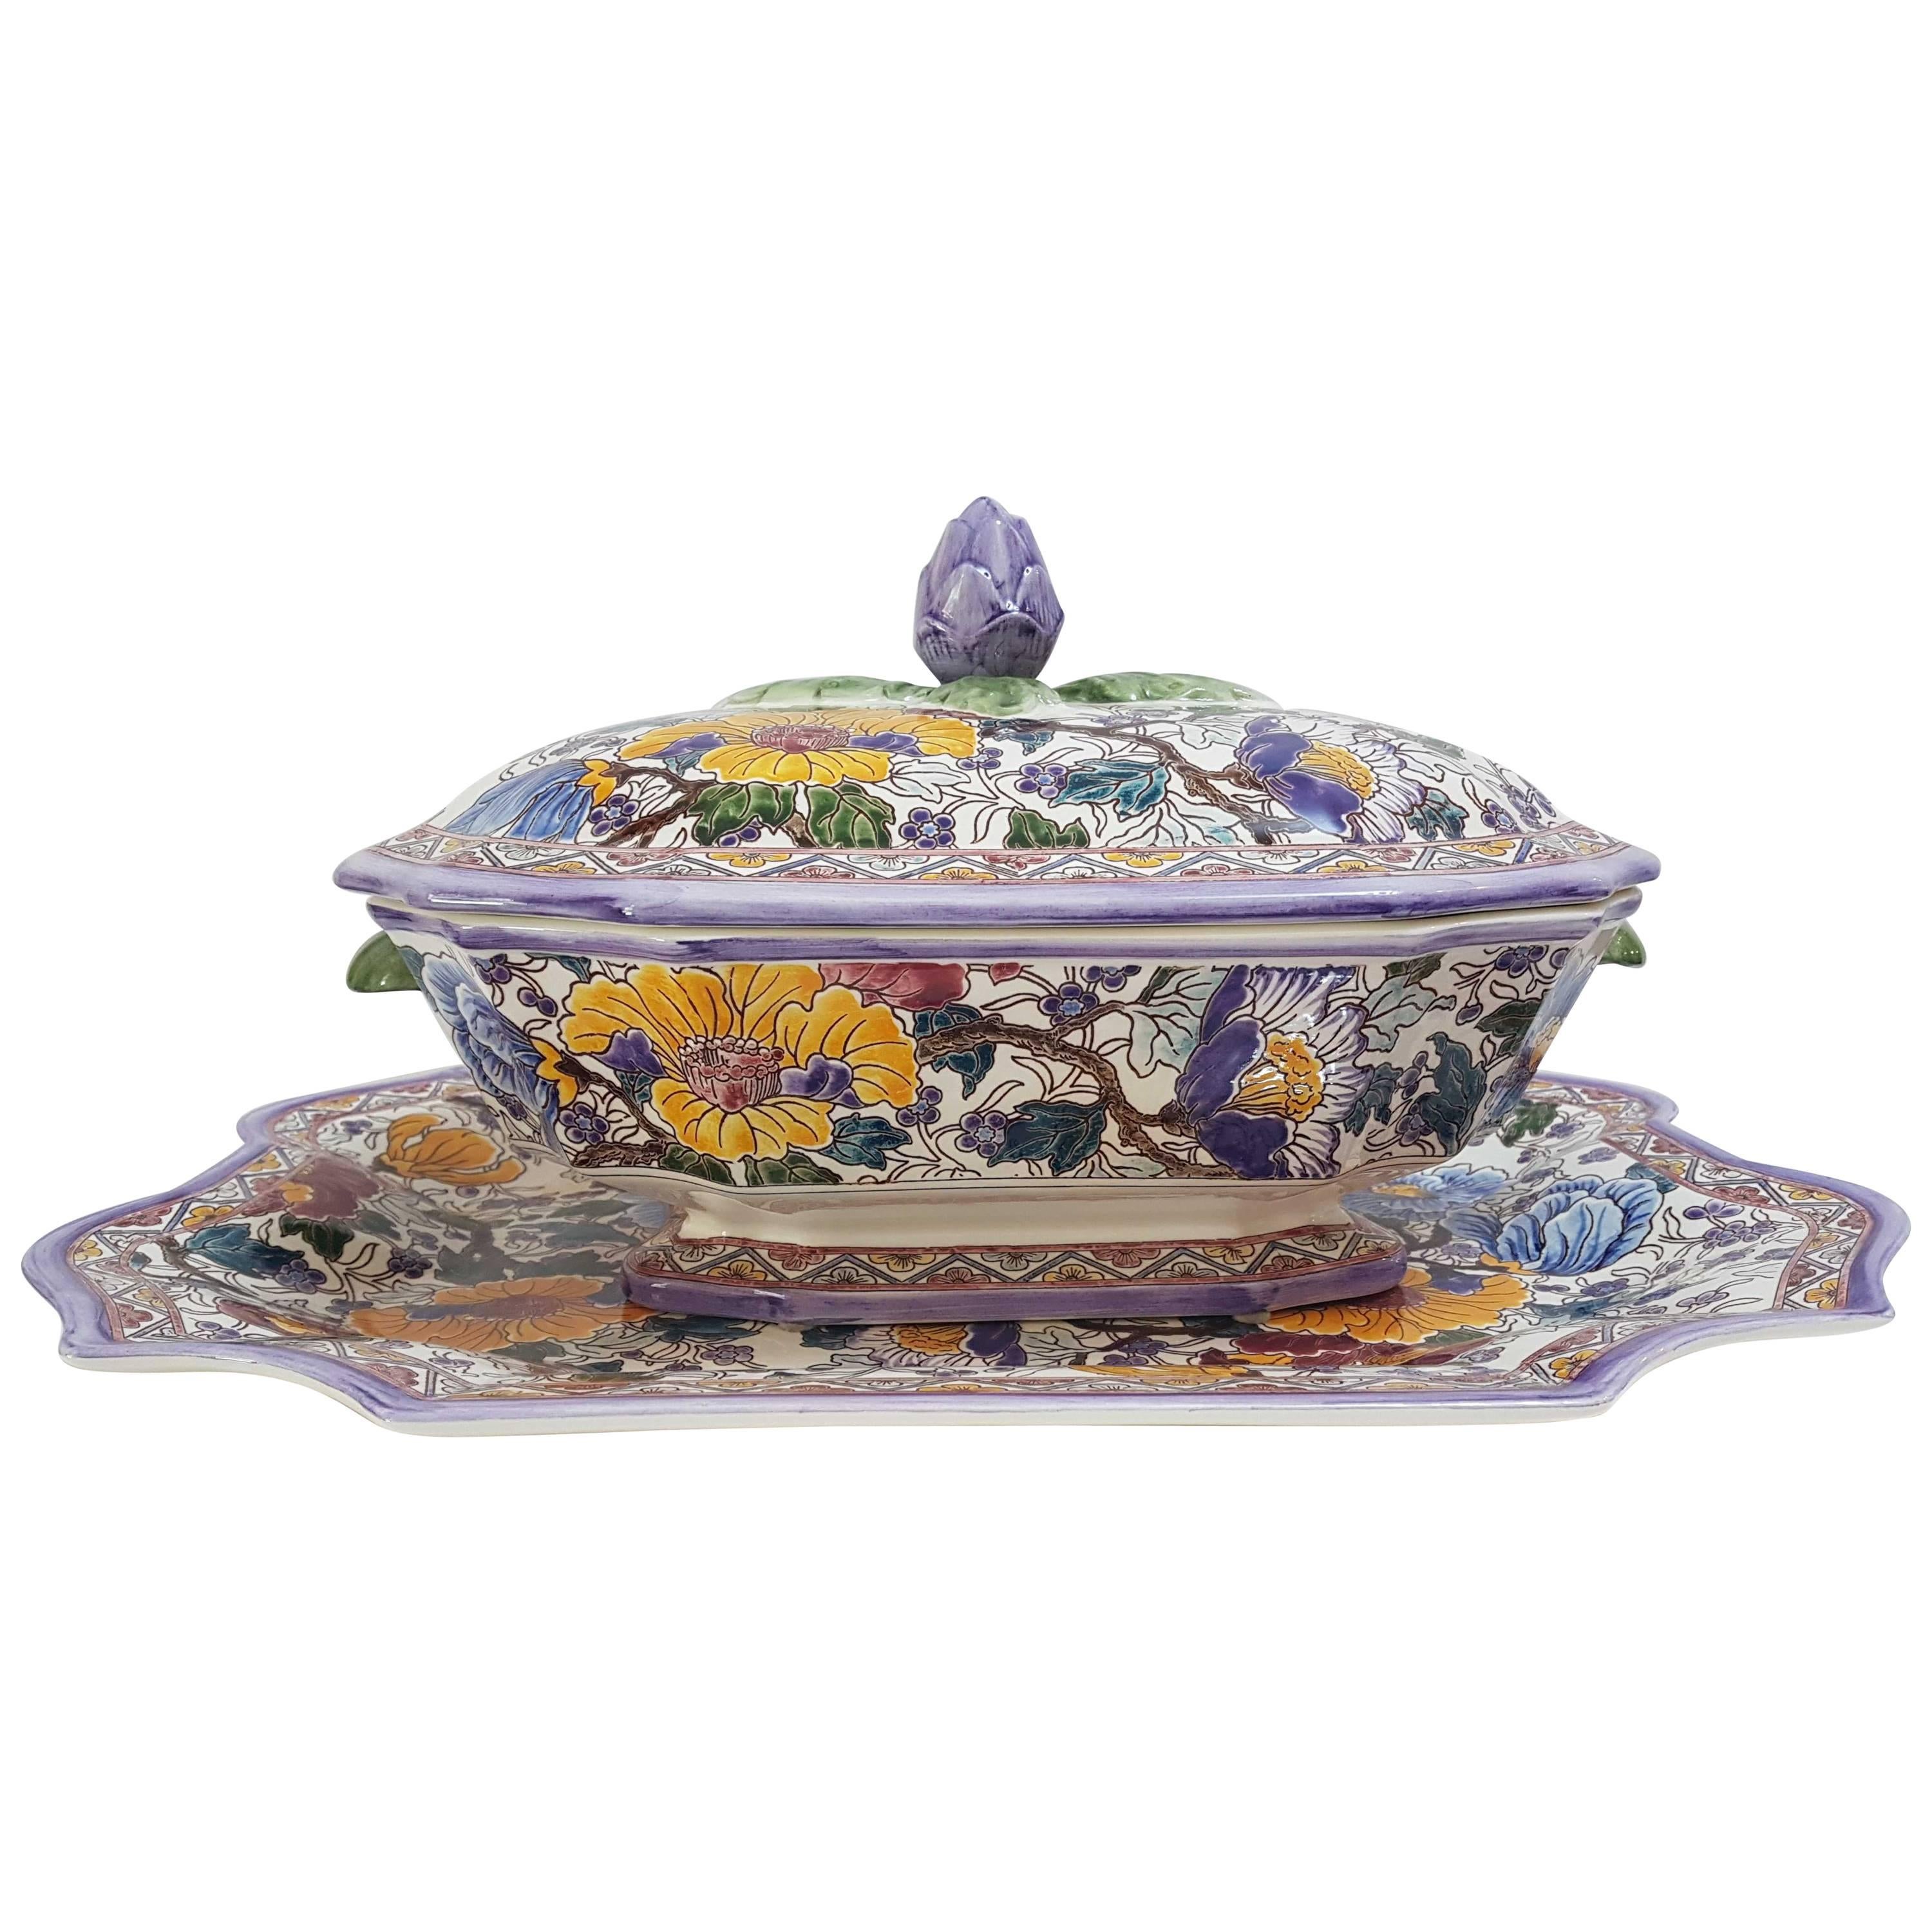 Gien Limited Edition French Hand-Painted Faience Soup Tureen and Stand